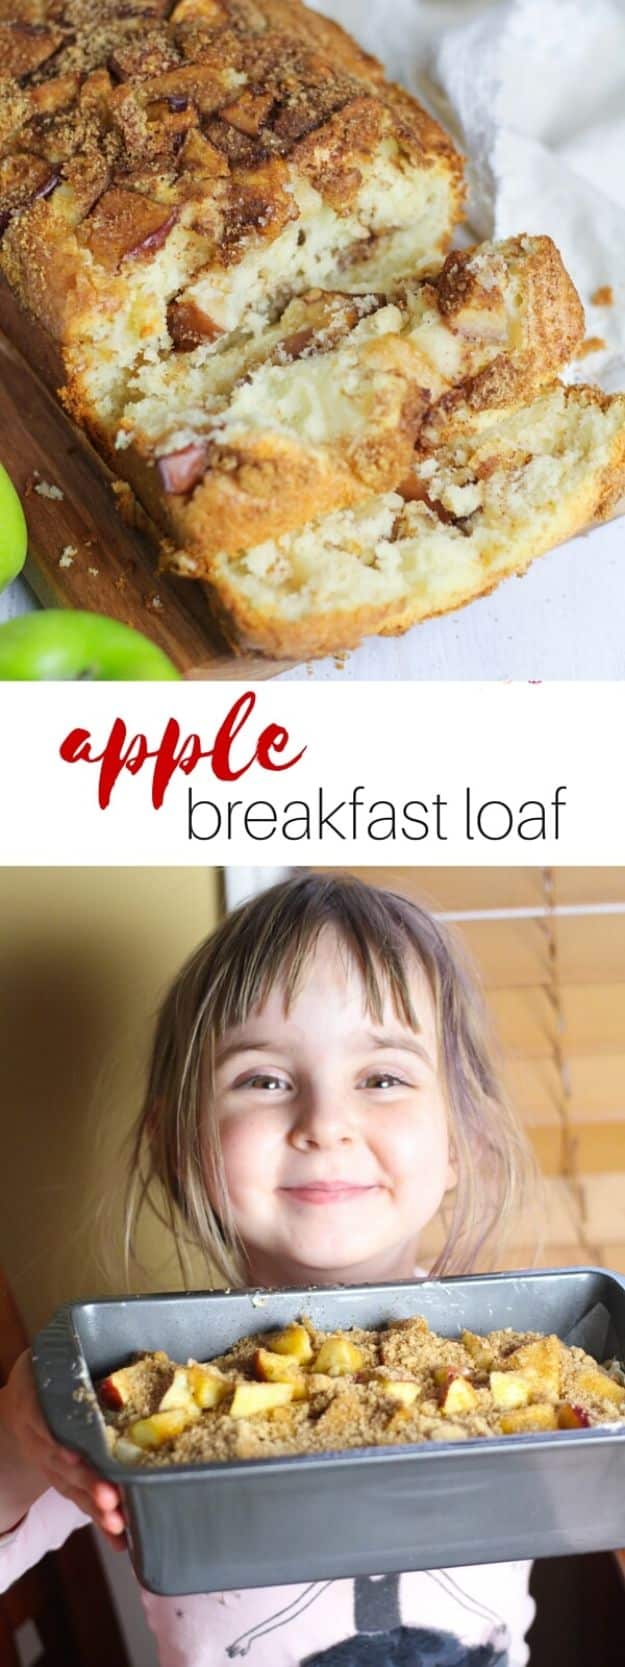 Best Recipes To Teach Your Kids To Cook - Apple Breakfast Loaf - Easy Ideas To Show Children How to Prepare Food - Kid Friendly Recipes That Boys and Girls Can Make Themselves - No Bake, 5 Minute Foods, Healthy Snacks, Salads, Dips, Roll Ups, Vegetables and Simple Desserts - Recipes To Learn How To Make Fun Food http://diyjoy.com/best-recipes-teach-kids-to-cook